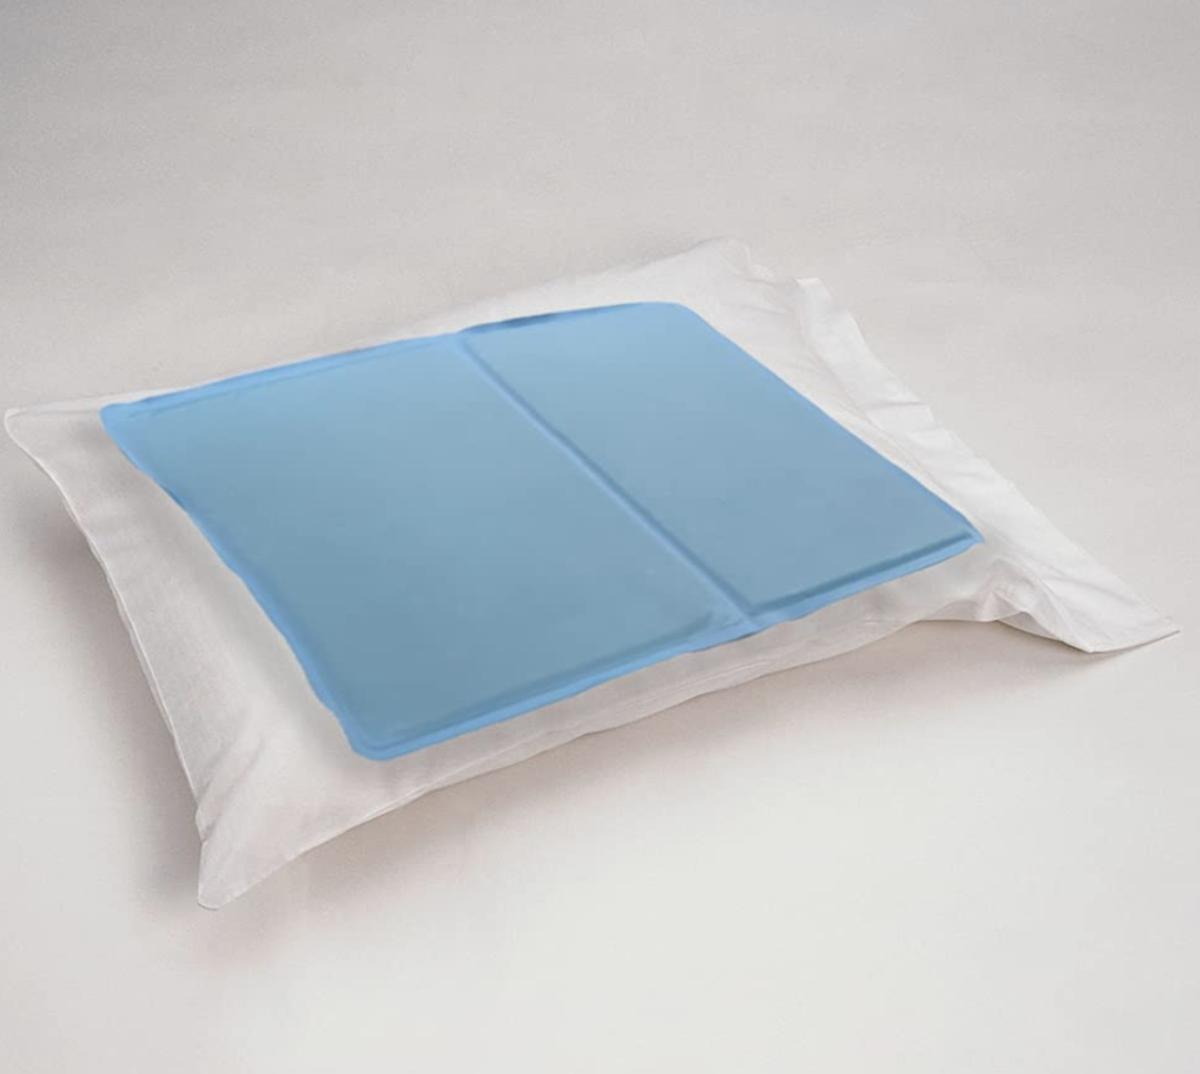 AlphaCool Ice Gel Cooling Pad -  Cooling Pillow Insert